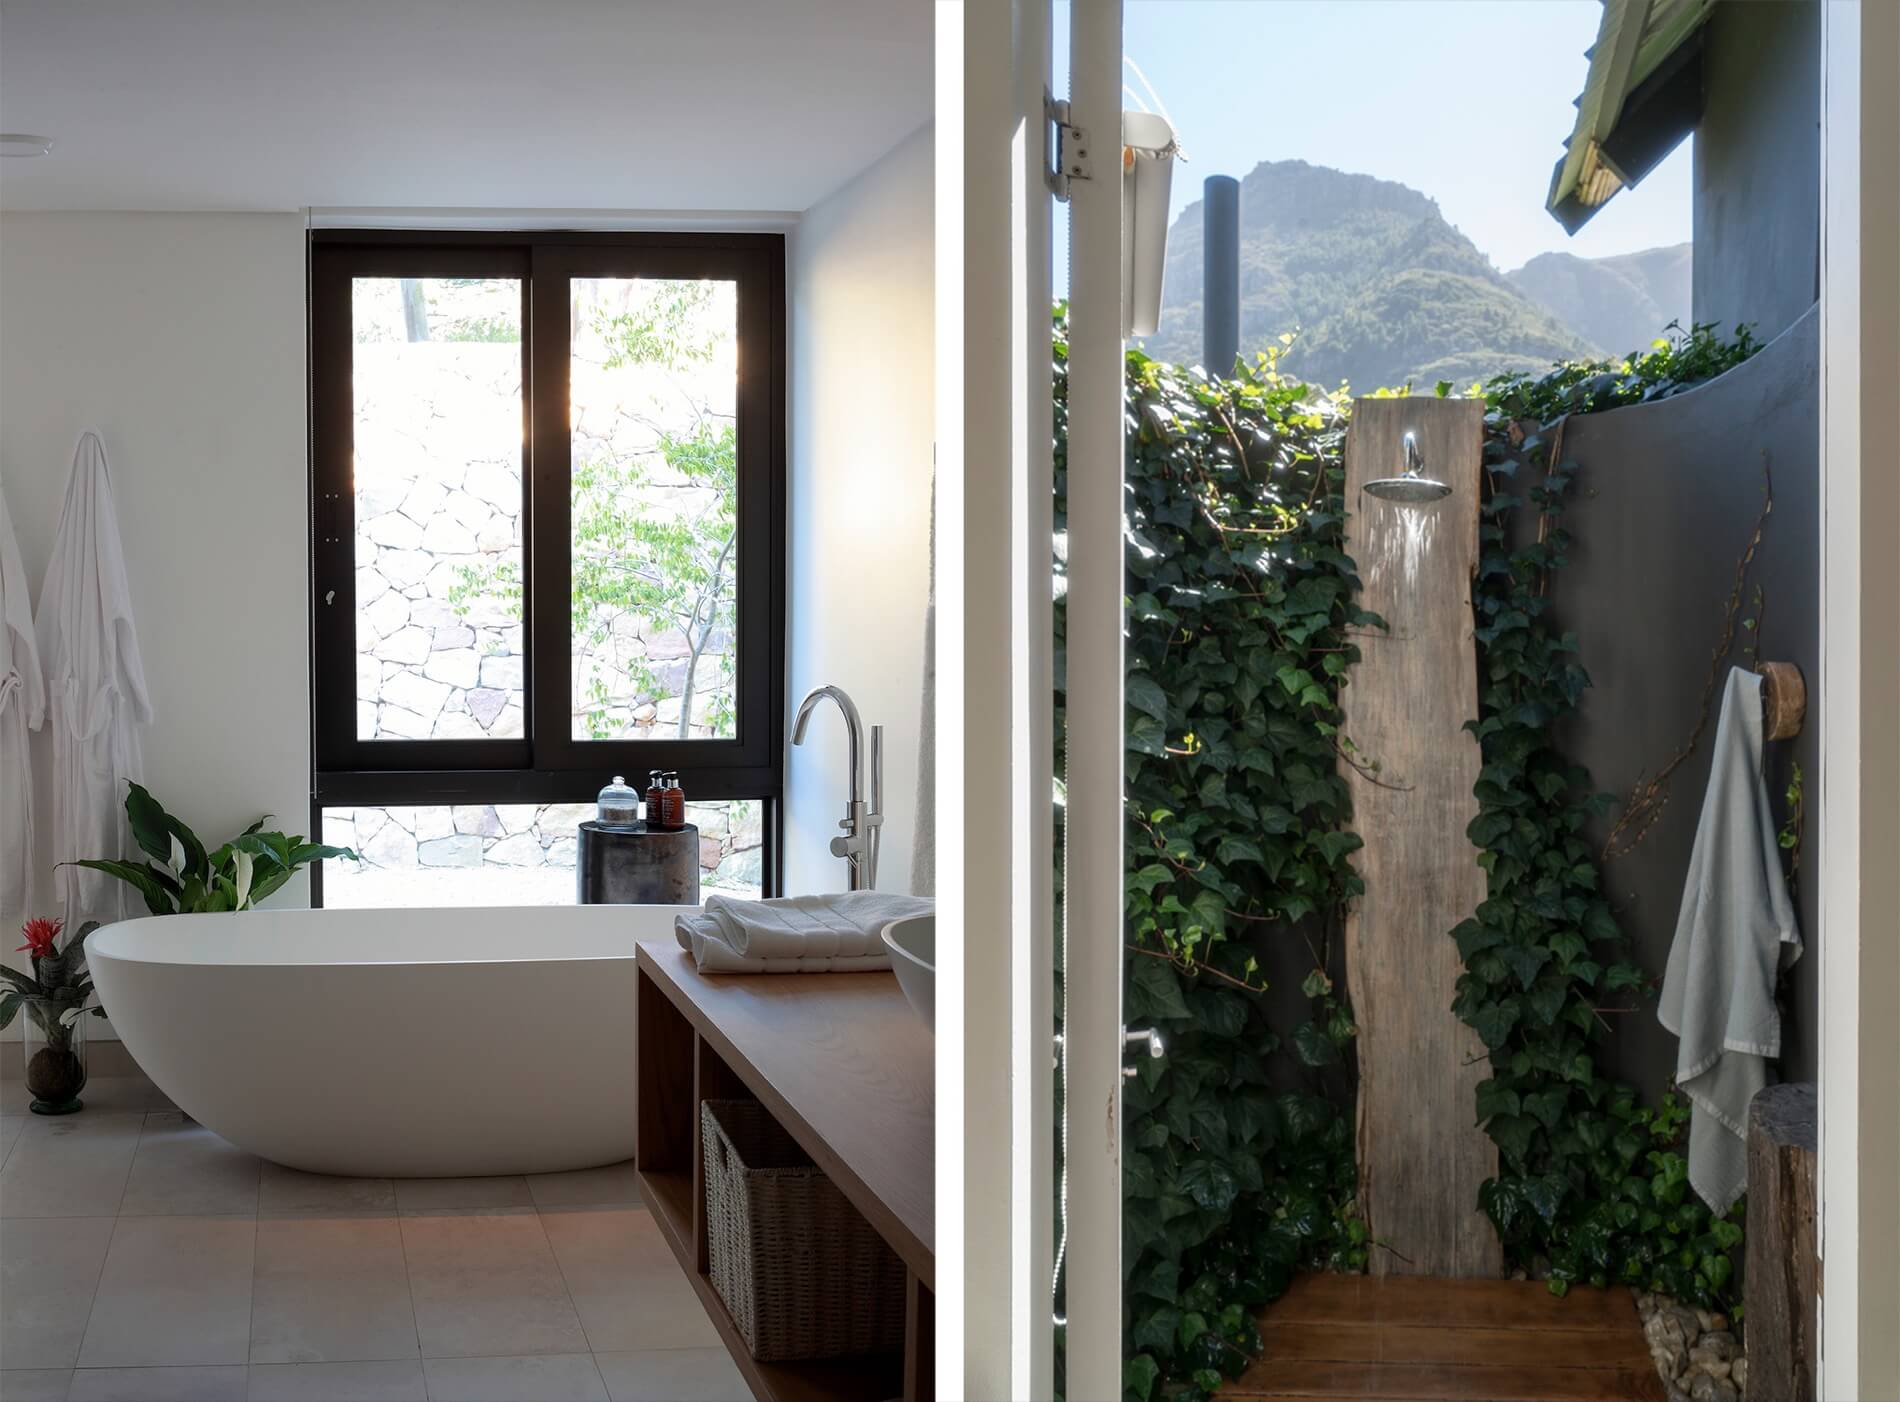 Photo 13 of Villa Maison Noir accommodation in Hout Bay, Cape Town with 5 bedrooms and 5 bathrooms